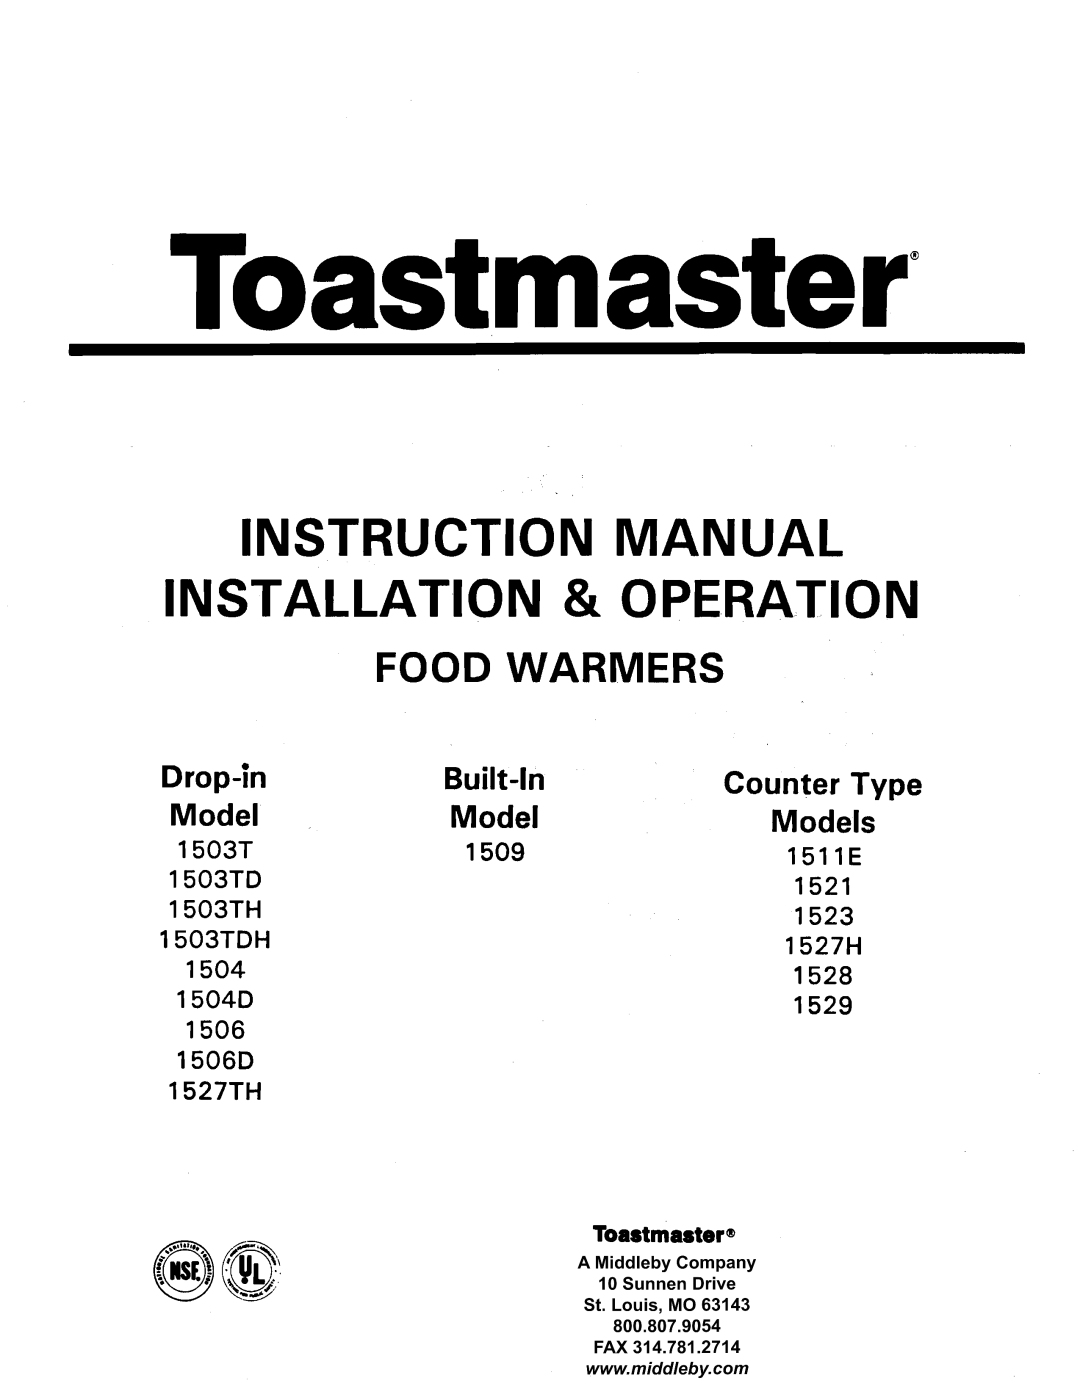 Toastmaster 1529 owner manual Model, For TOASTMASTER, Food Warmer 